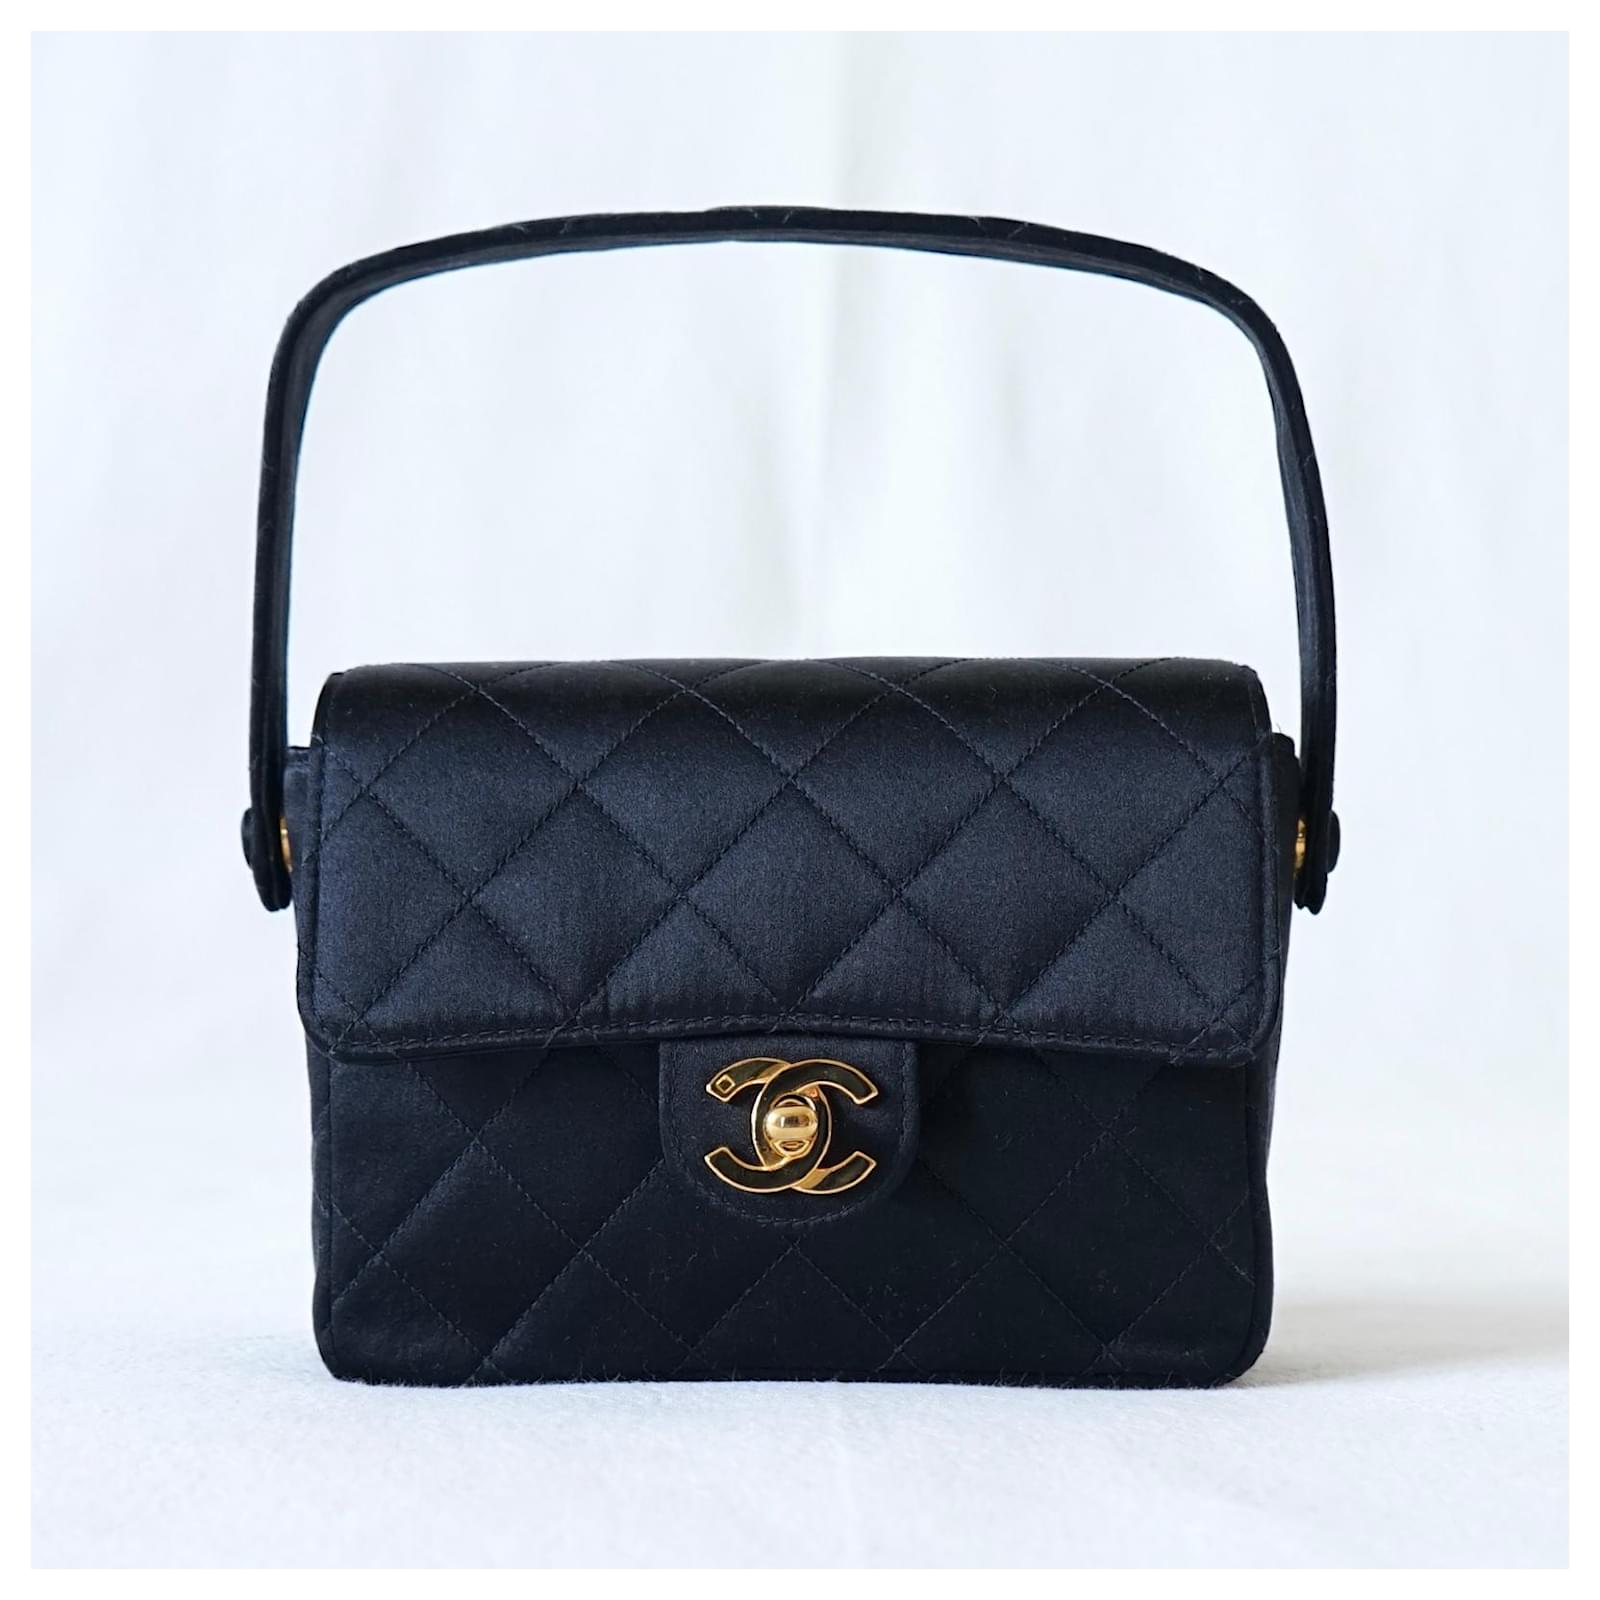 Chanel pre-owned 1995 classic - Gem